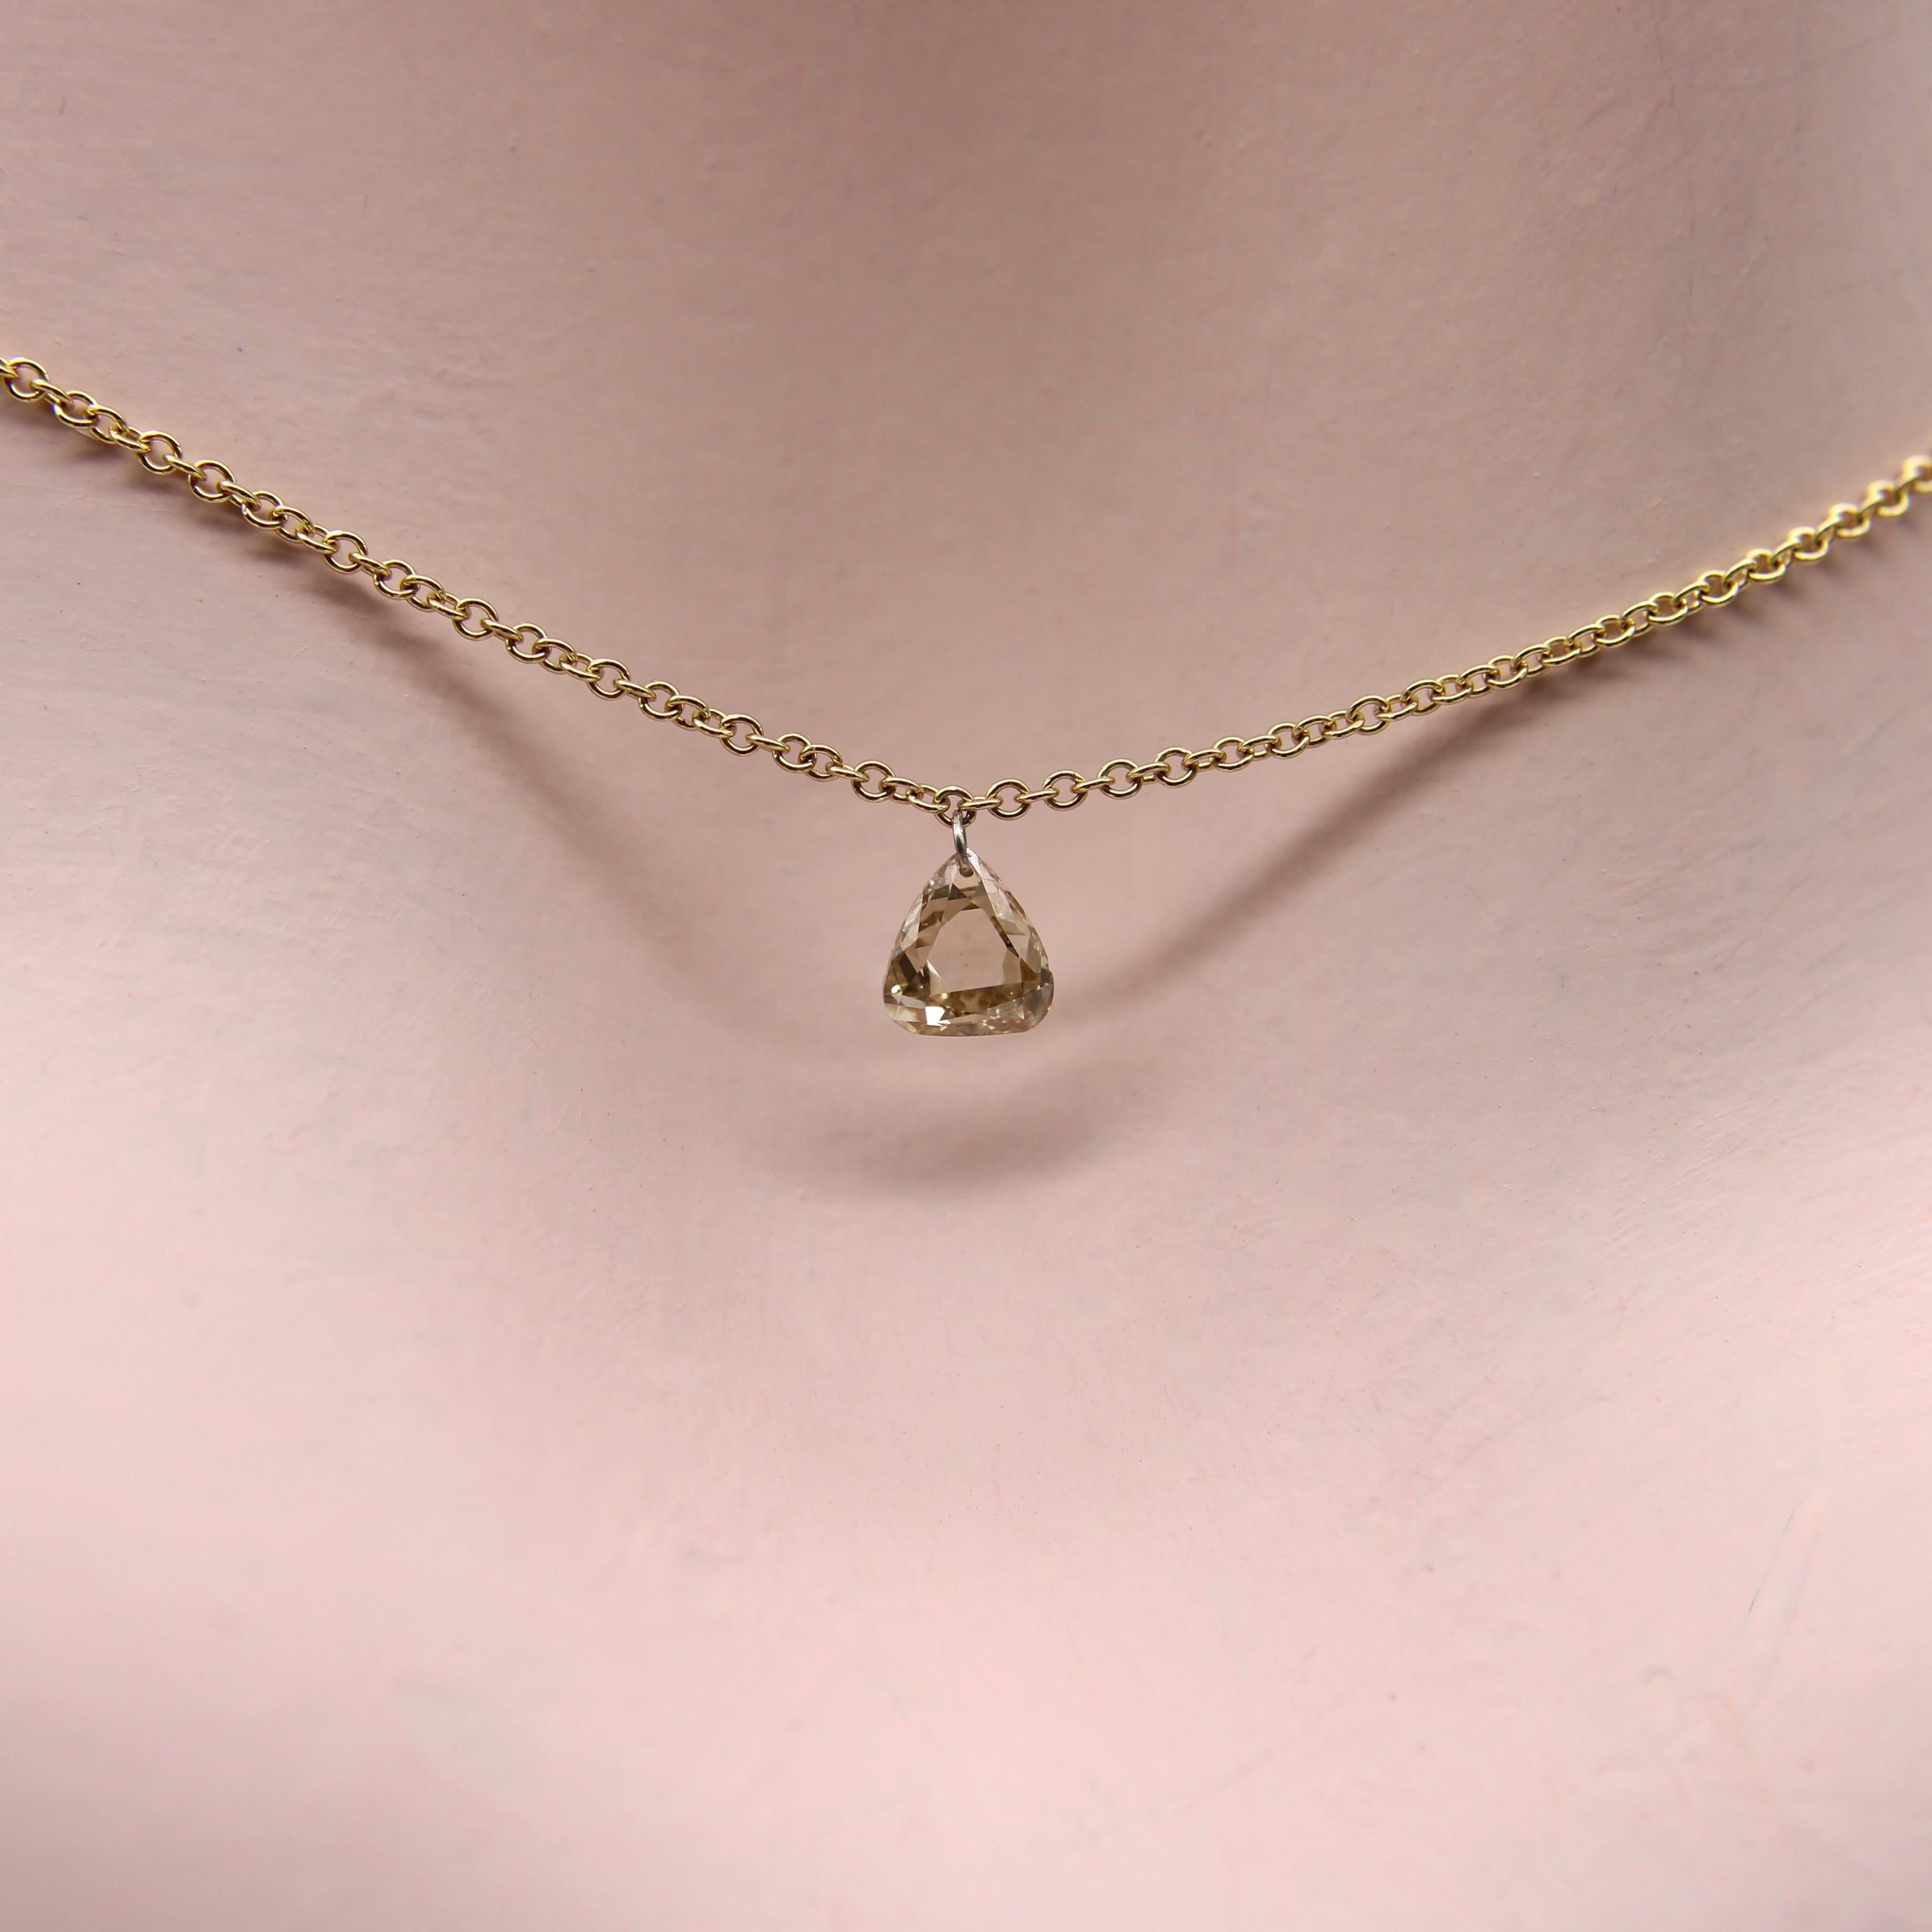 Dangling Pear Shape Champagne Rose Cut Diamond on 14K Gold Chain  For Sale 2